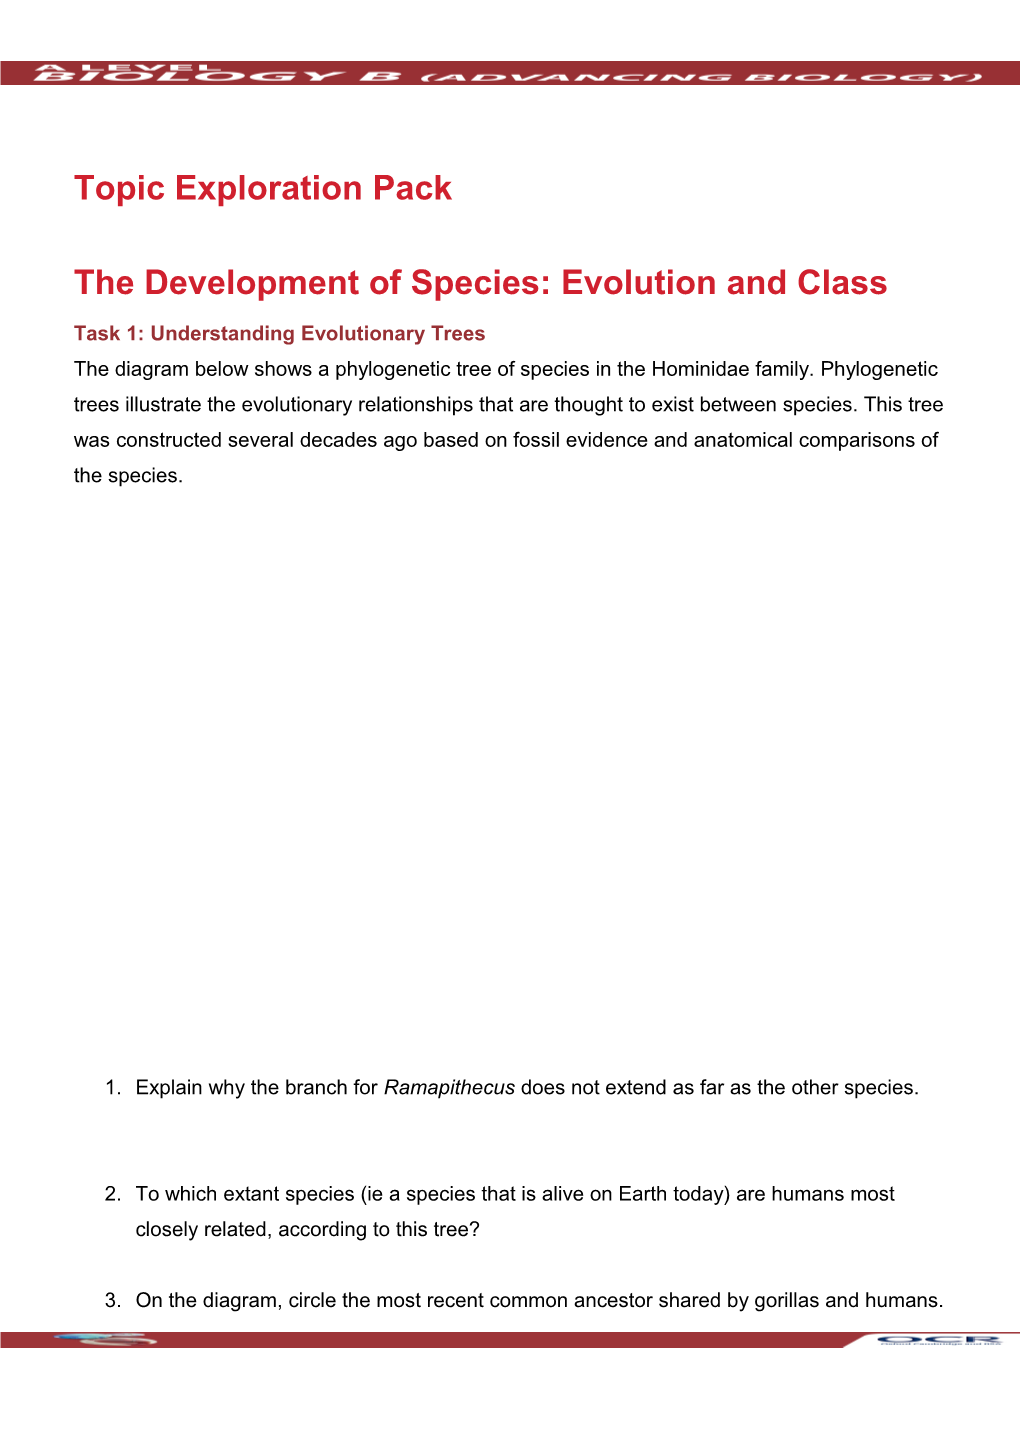 A Level Biology B (Advancing Biology) (Salters) Topic Exploration Pack